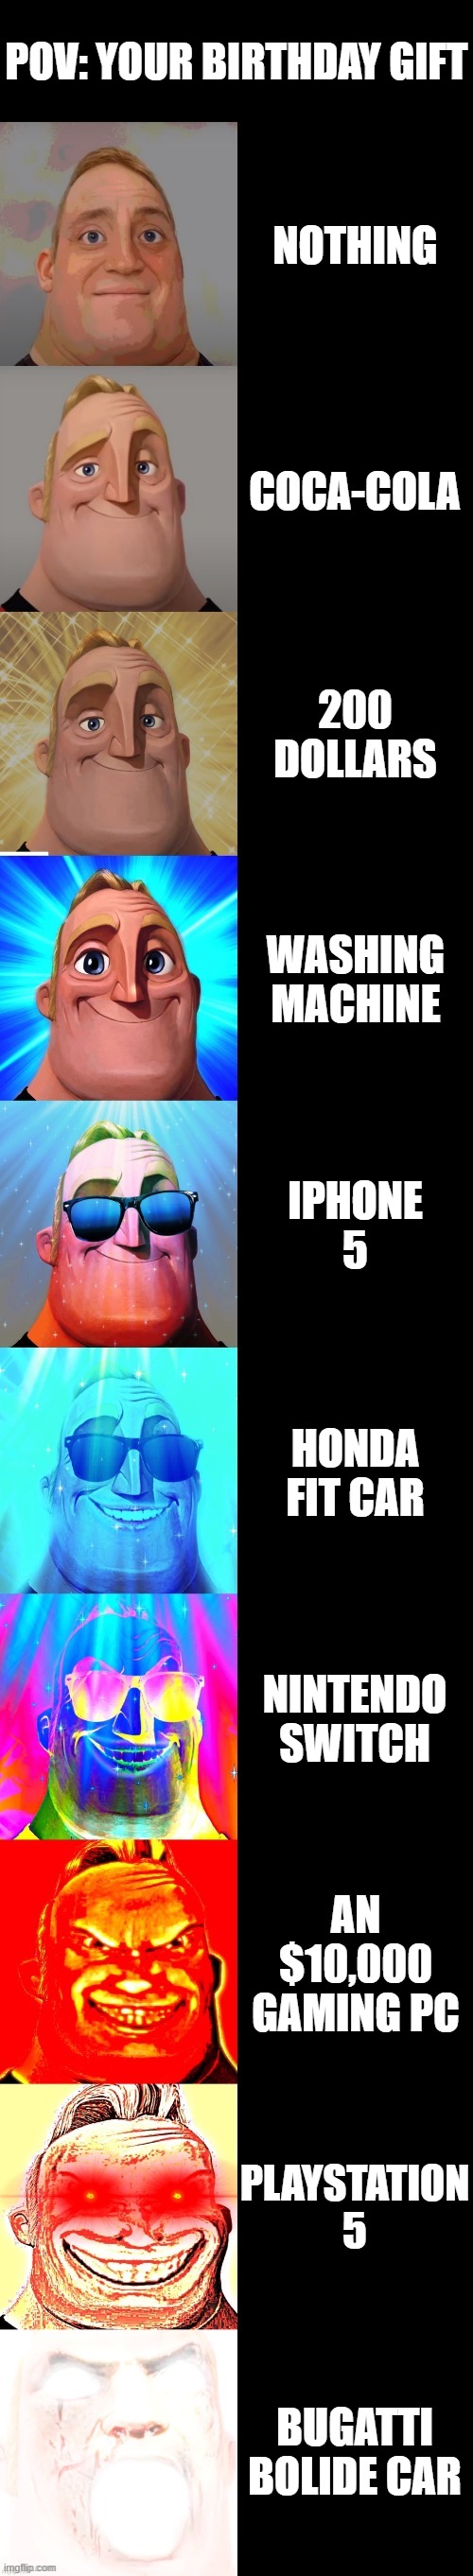 mr incredible becoming canny POV: your birthday gift | POV: YOUR BIRTHDAY GIFT; NOTHING; COCA-COLA; 200 DOLLARS; WASHING MACHINE; IPHONE 5; HONDA FIT CAR; NINTENDO SWITCH; AN $10,000 GAMING PC; PLAYSTATION 5; BUGATTI BOLIDE CAR | image tagged in mr incredible becoming canny | made w/ Imgflip meme maker